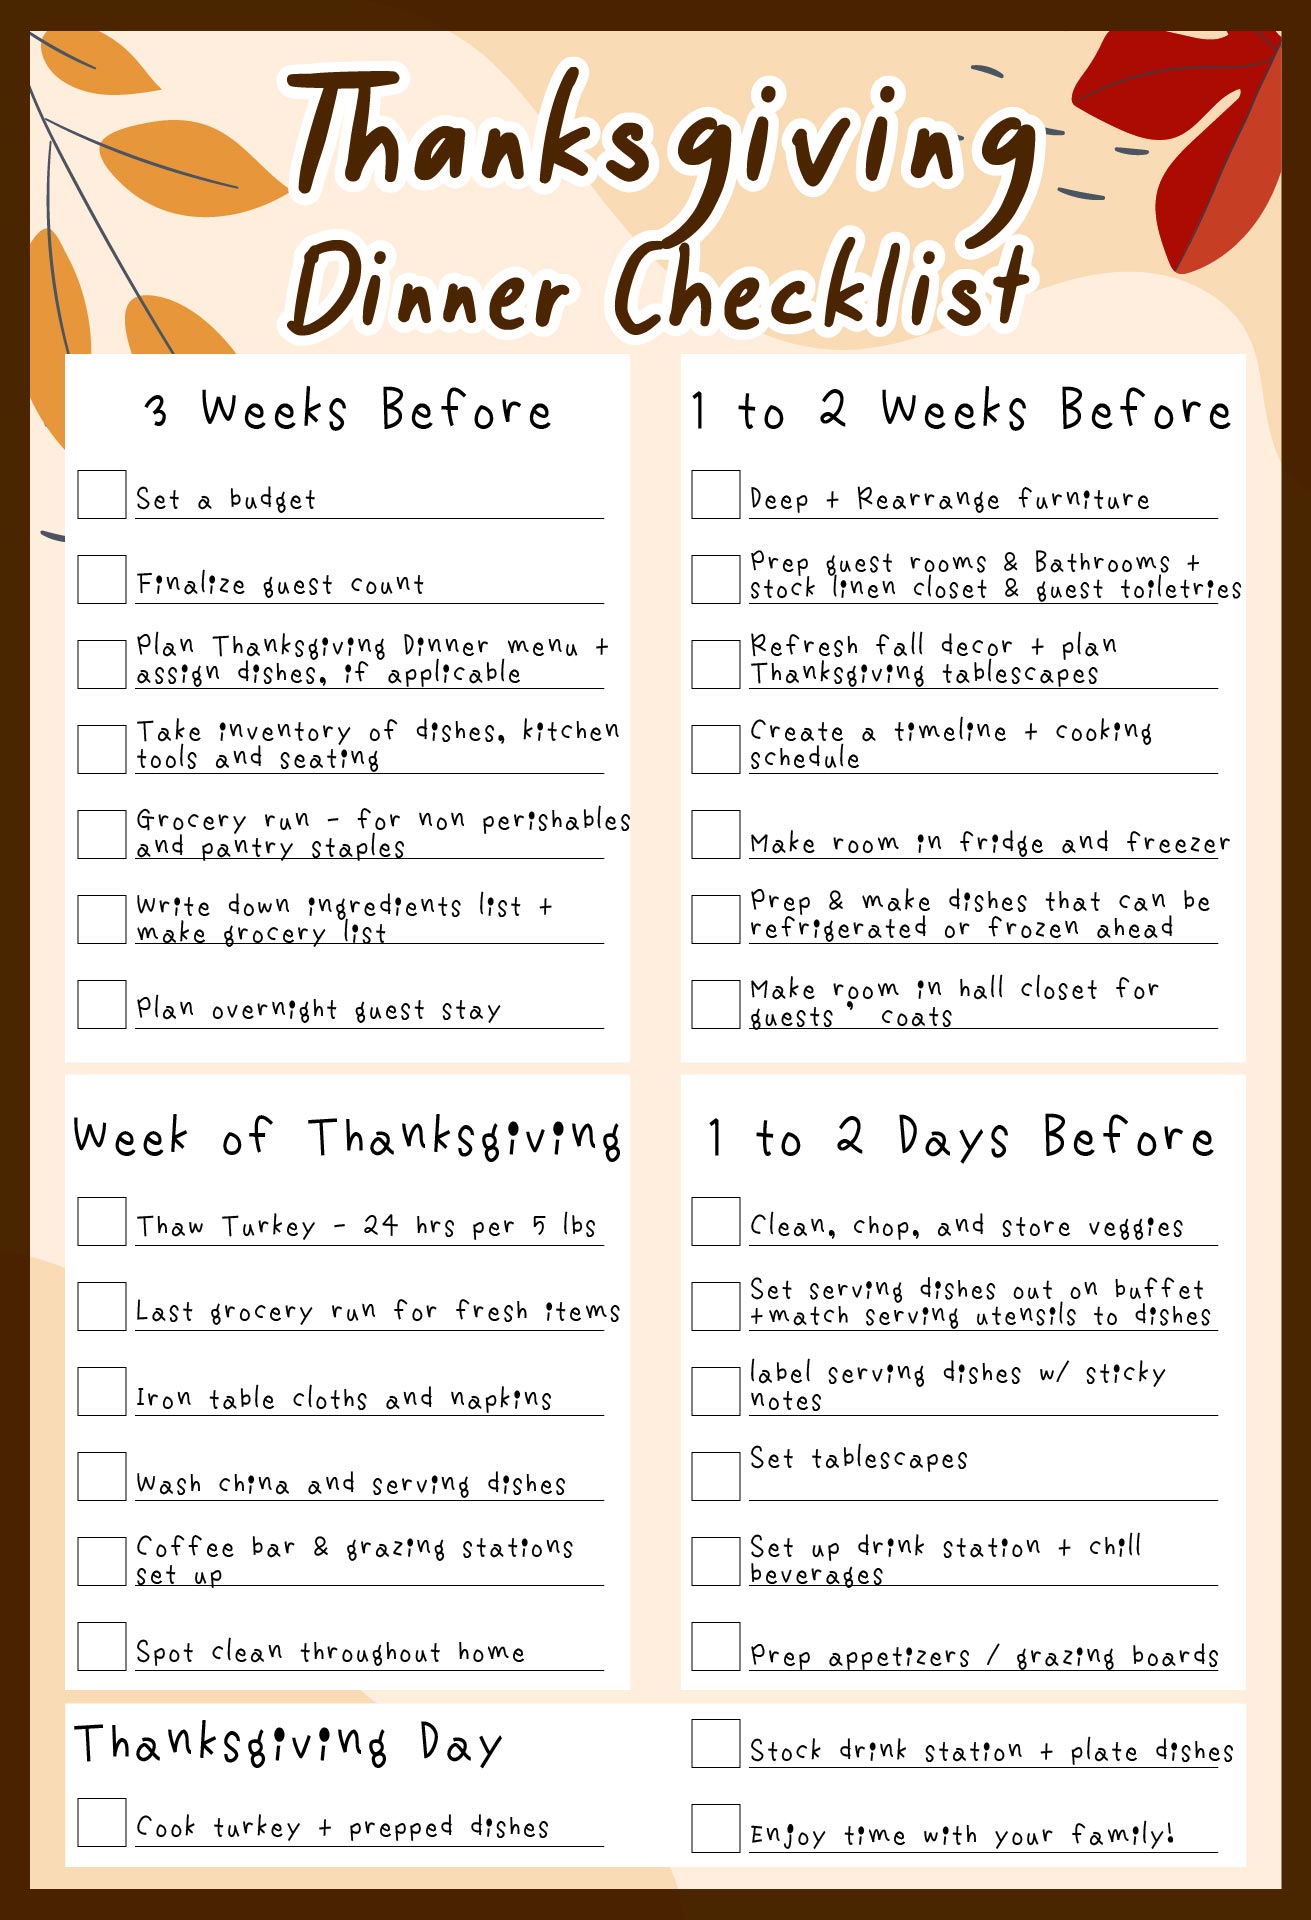 Your Last Minute Thanksgiving Checklist Printable